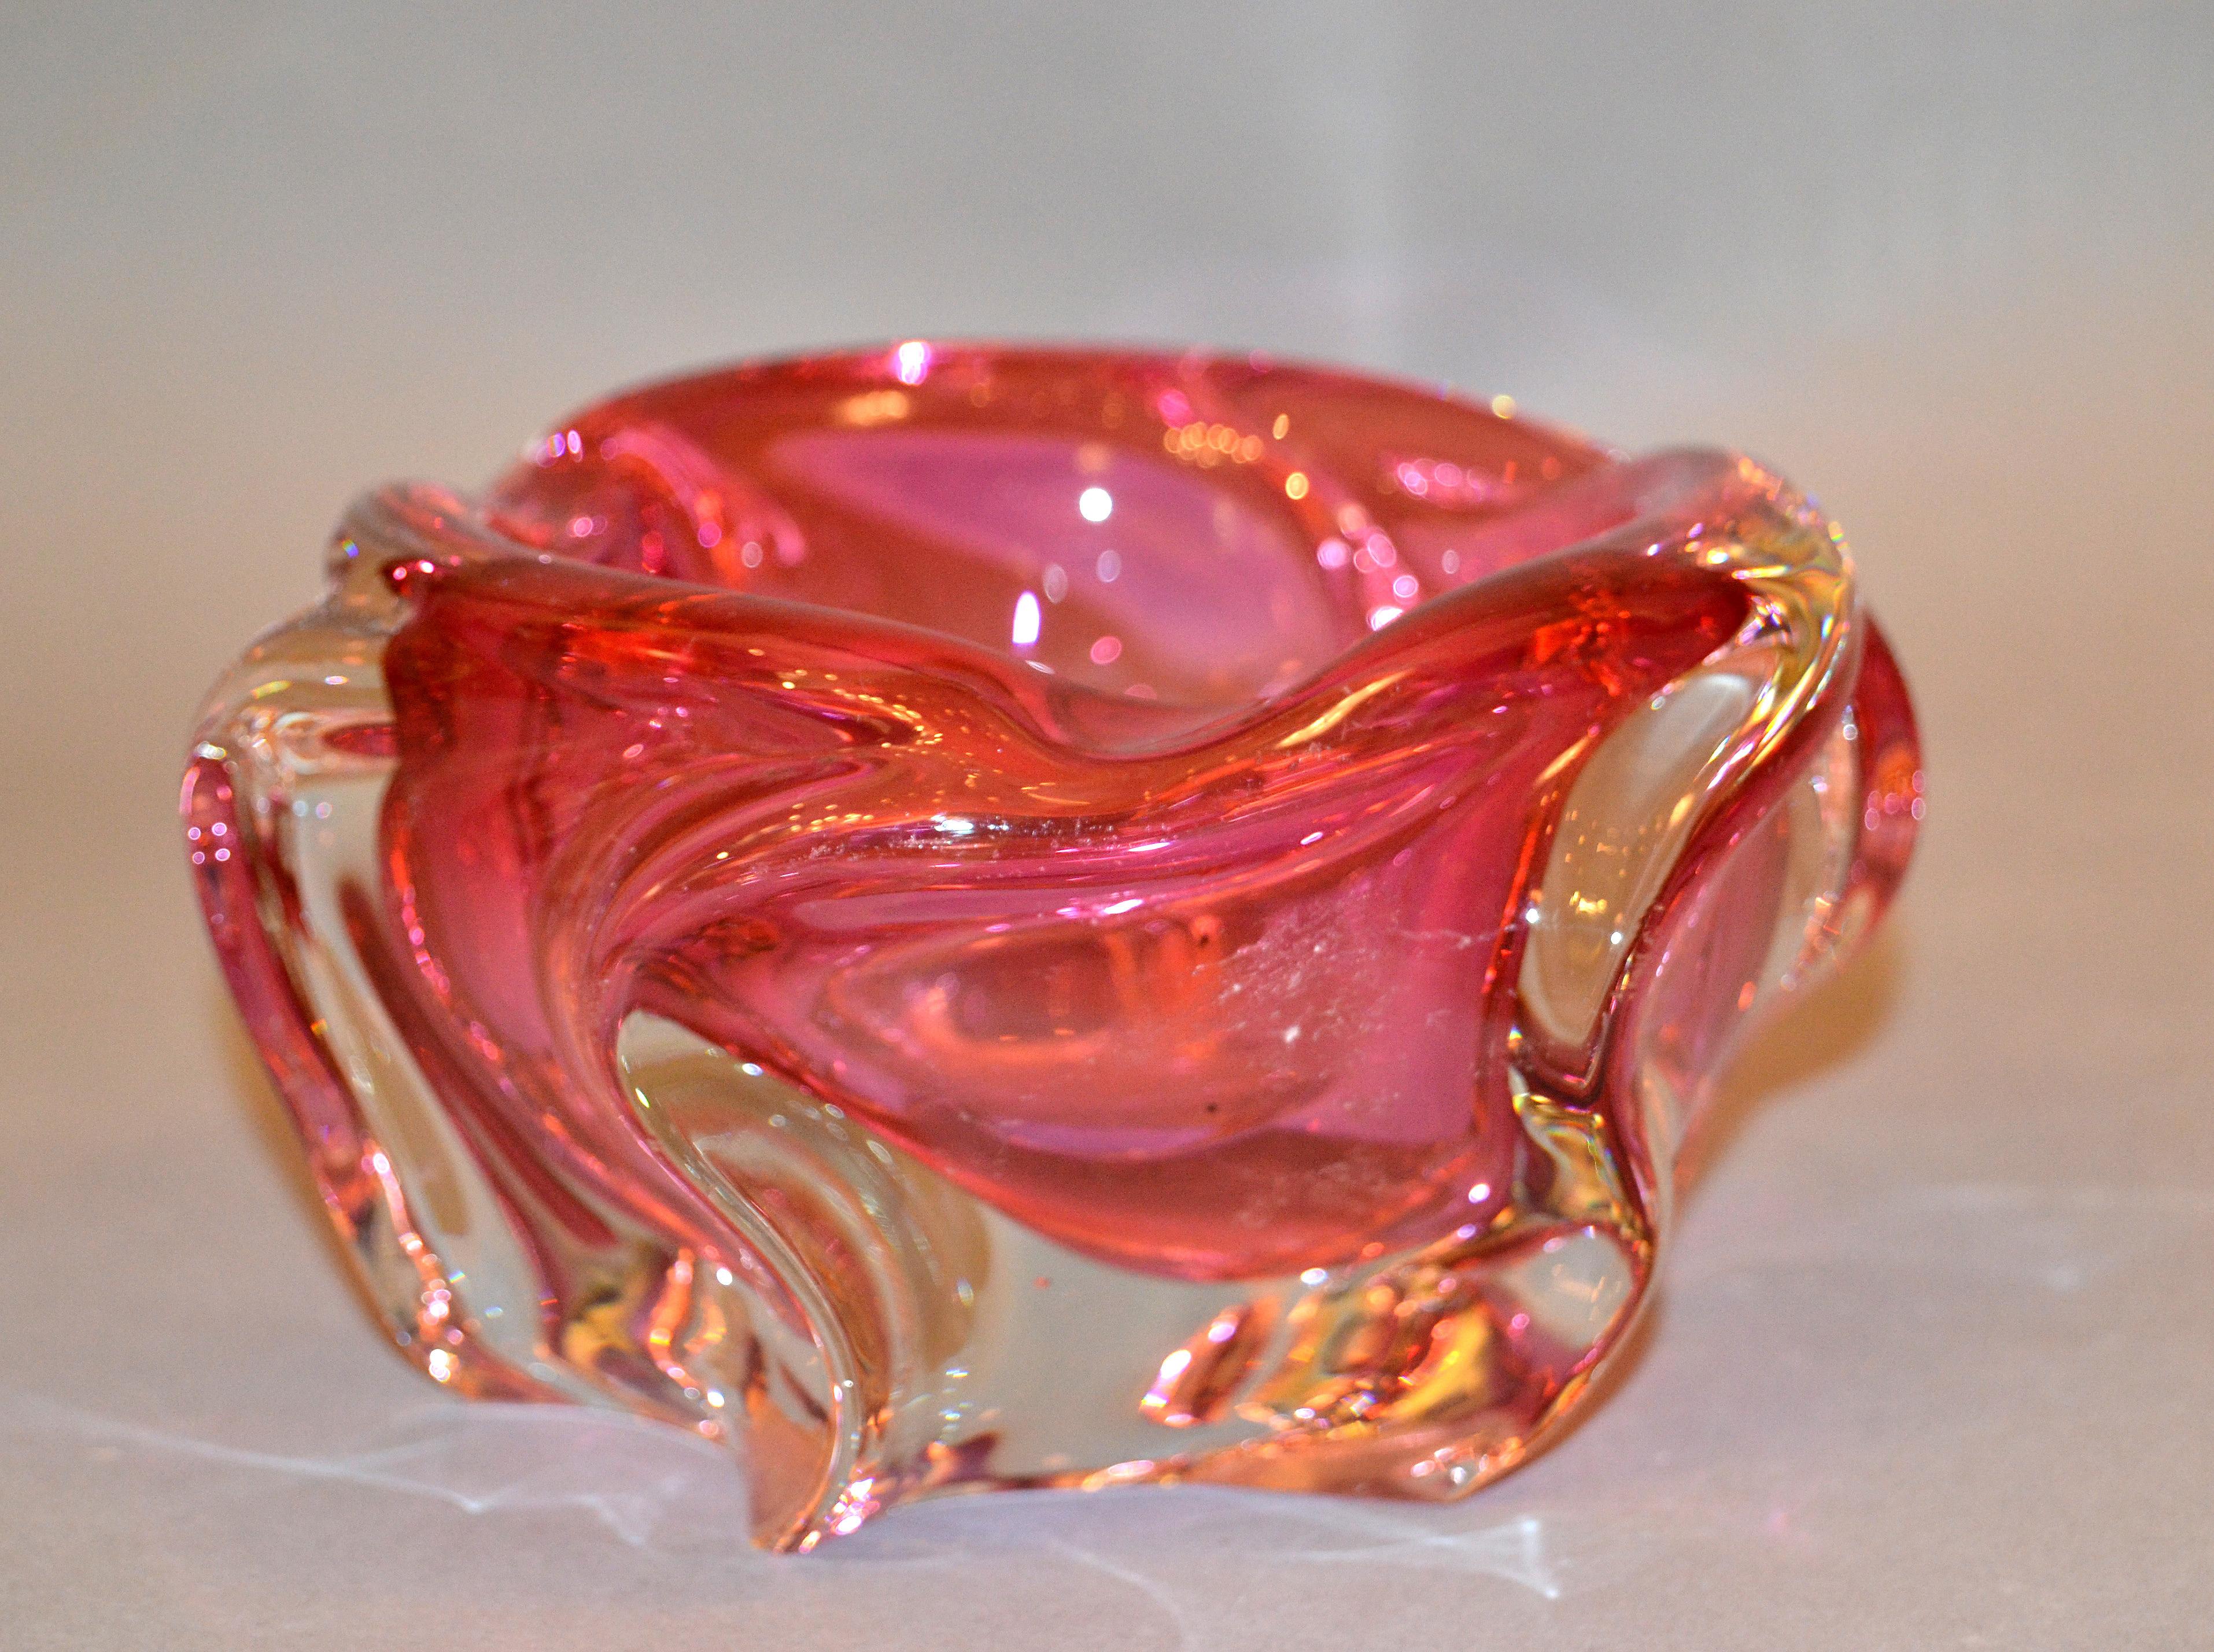 Mid-Century Modern Murano Art Glass Pink & Clear Blown Glass Catchall, Bowl, Ashtray Made In Italy